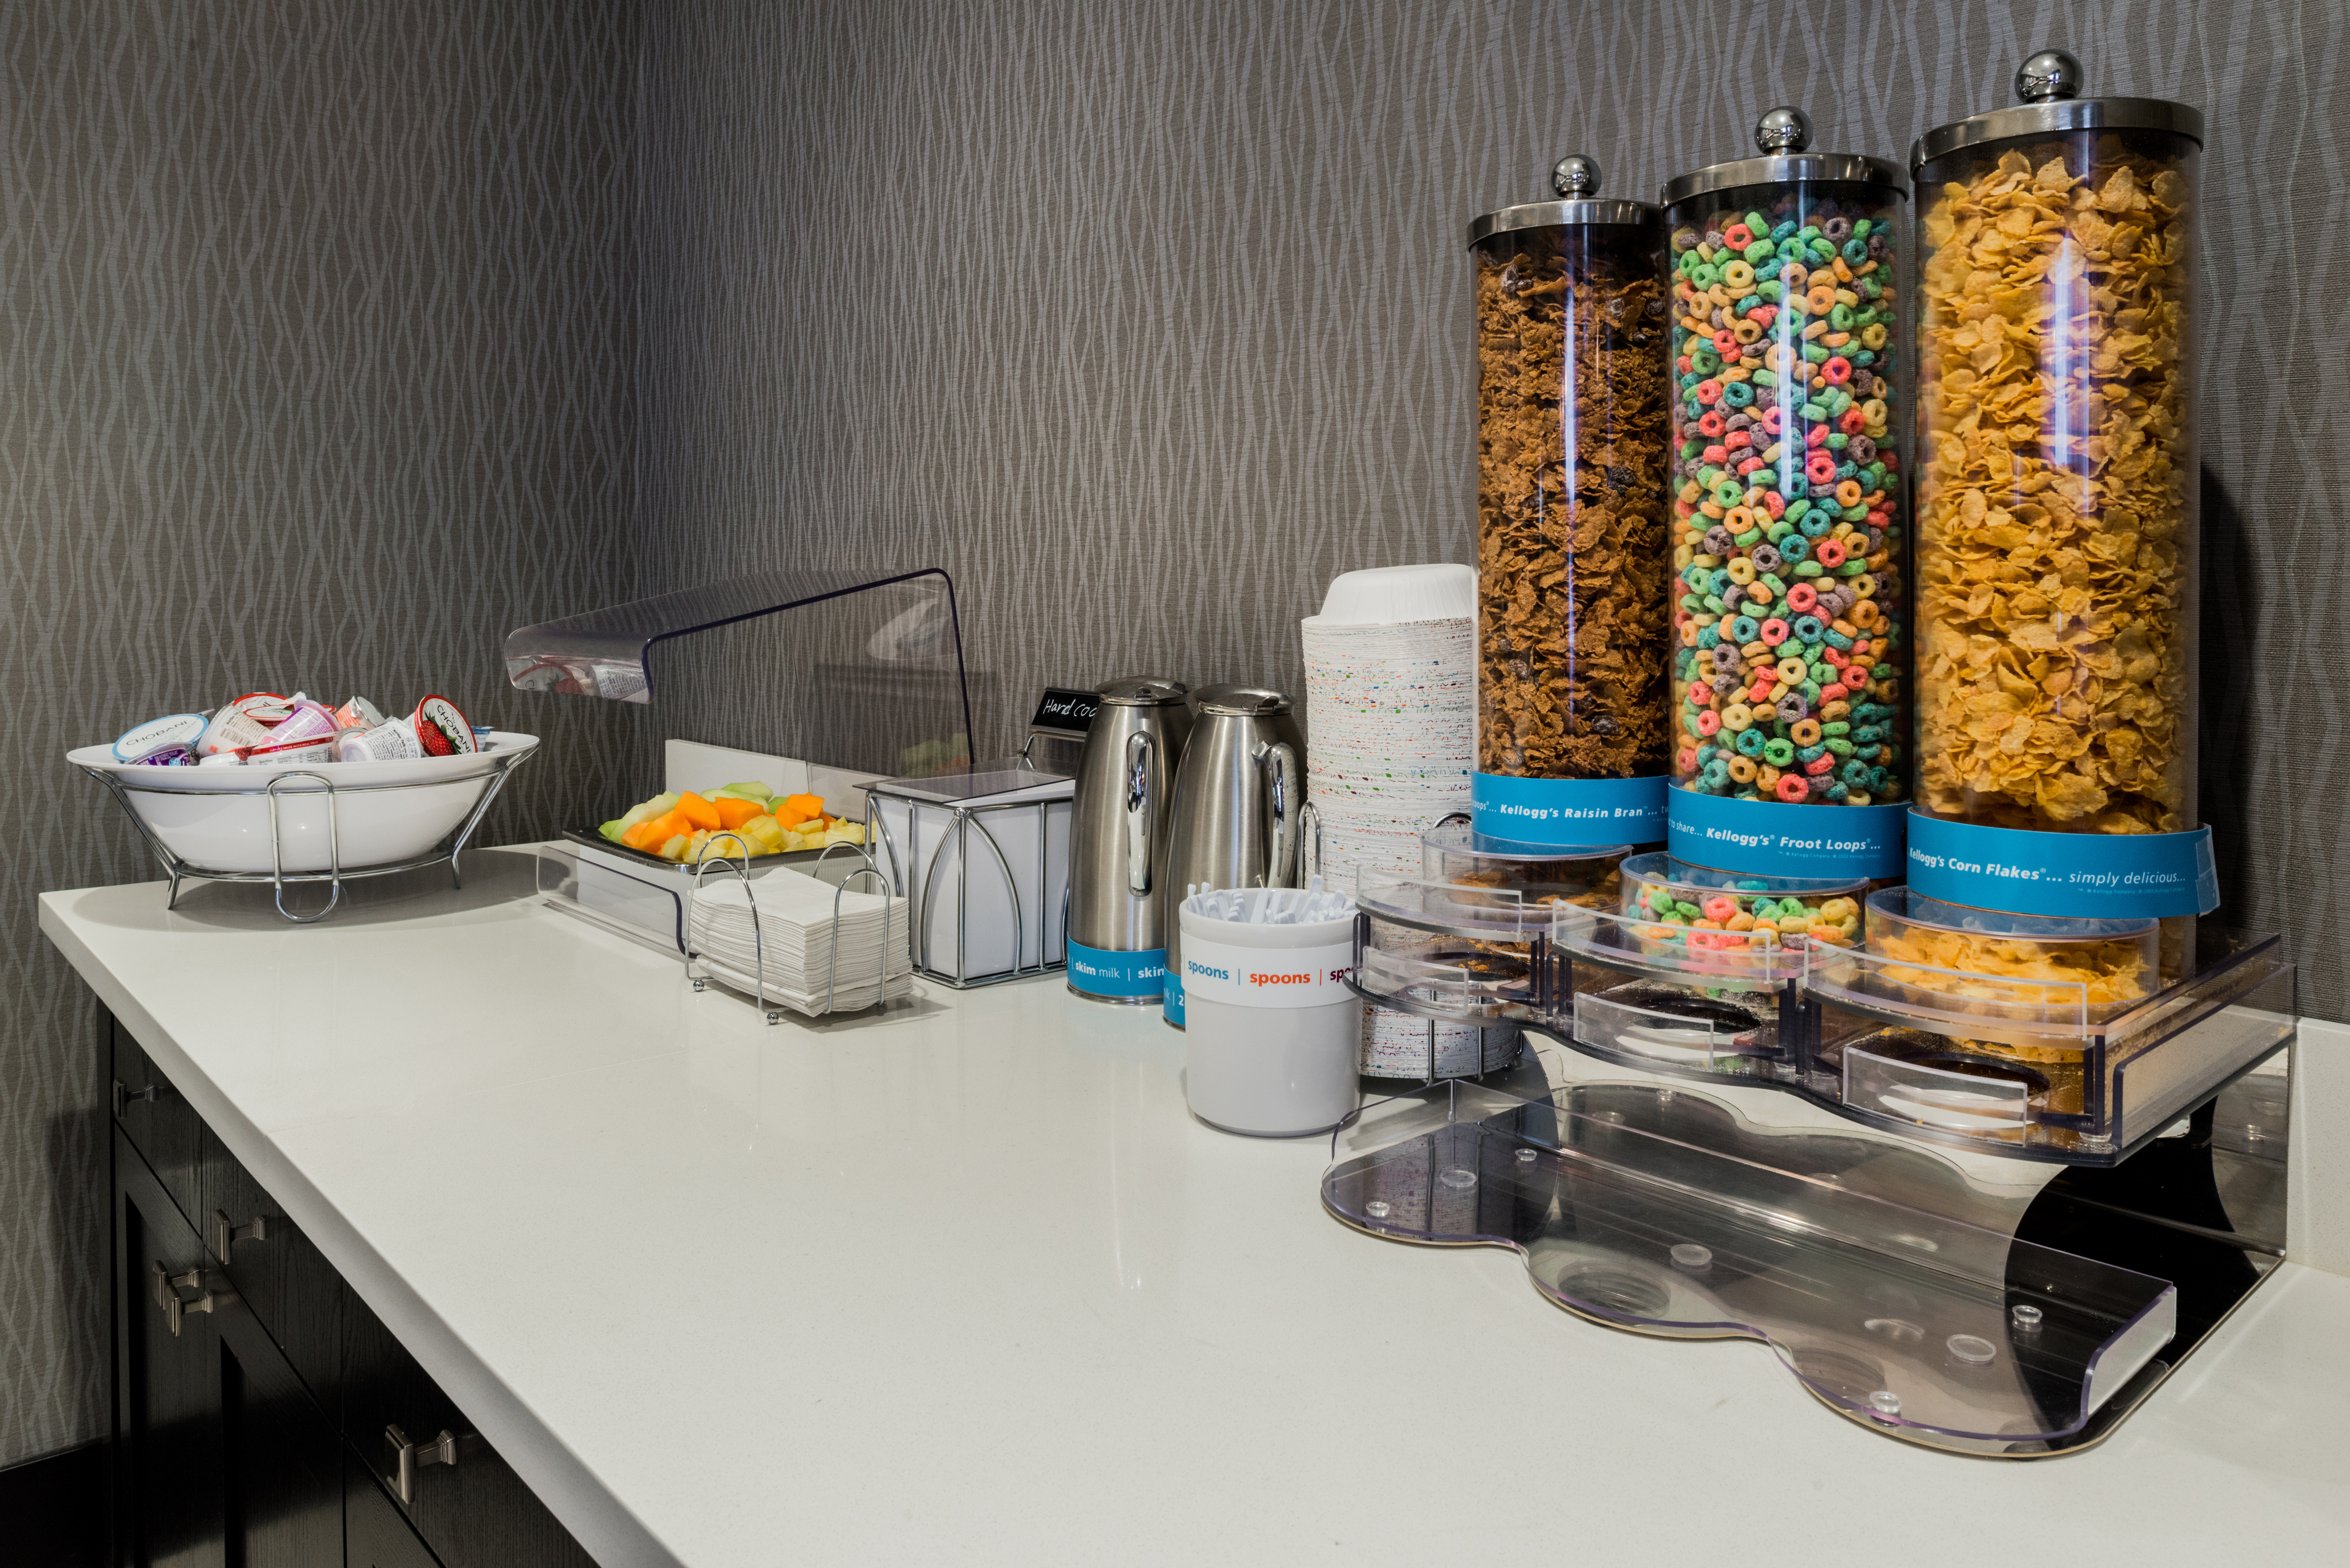 Breakfast Area with Cereal Station